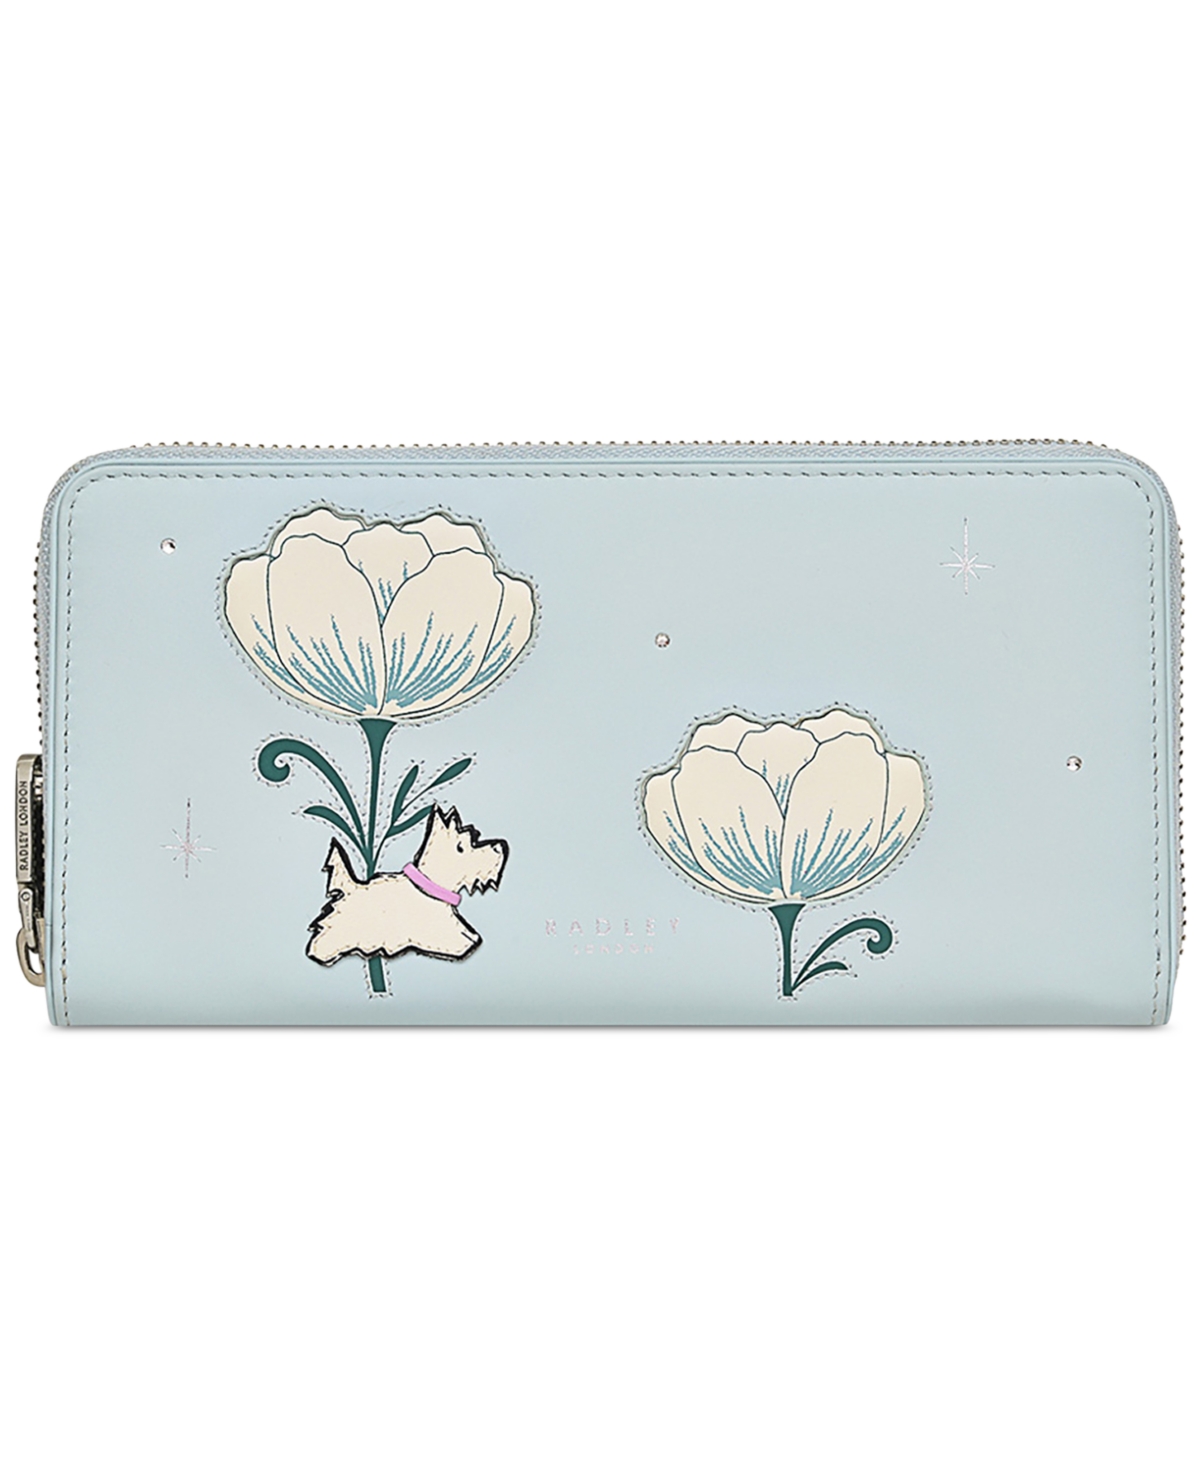 Spring Rose Large Zip Around Leather Wallet - Soft Blue